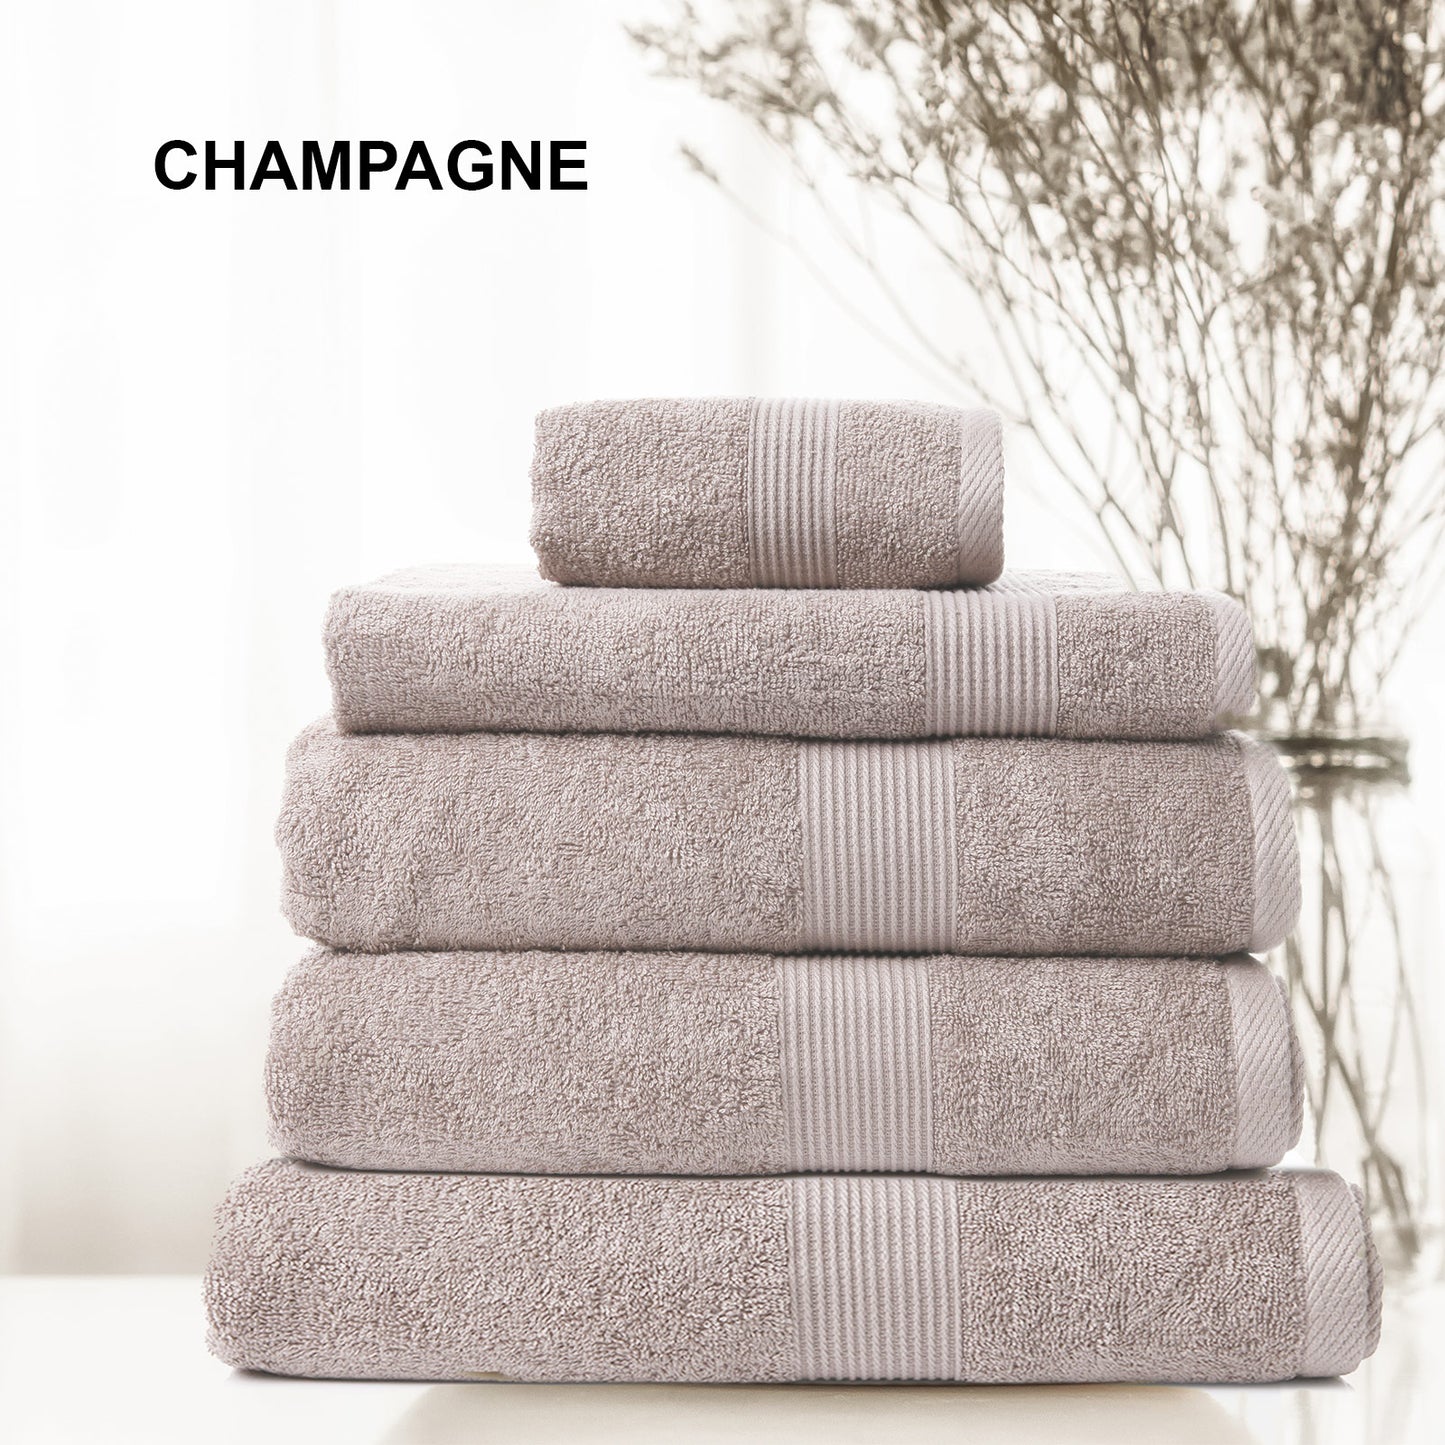 Cotton Bamboo Towel 5-Piece Set Champagne